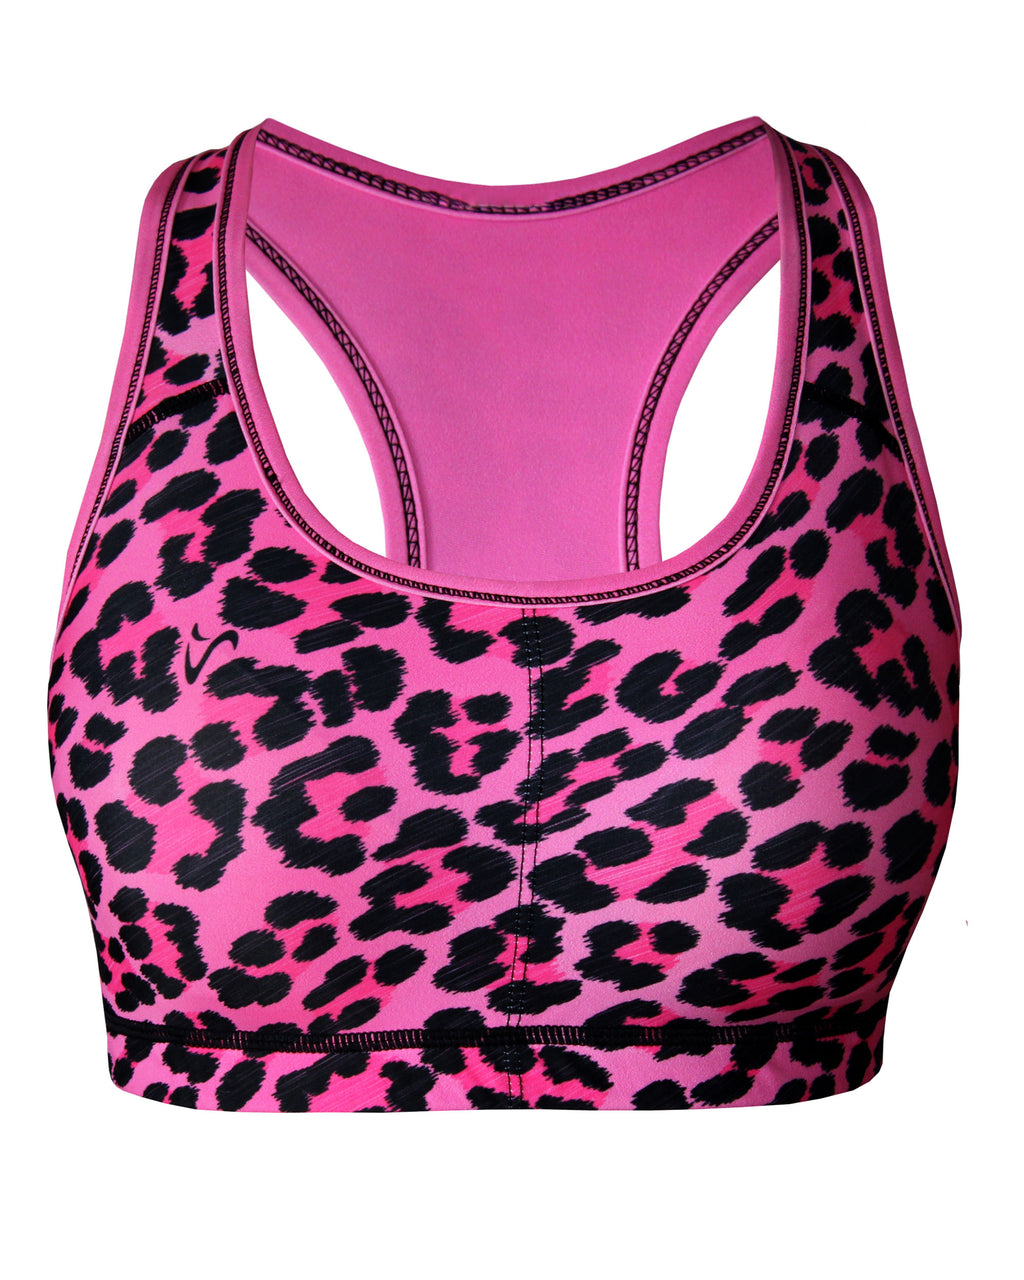 Pink Leopard Sports Bra for running far without any chafing. Also perfect for hiking and gym workouts.